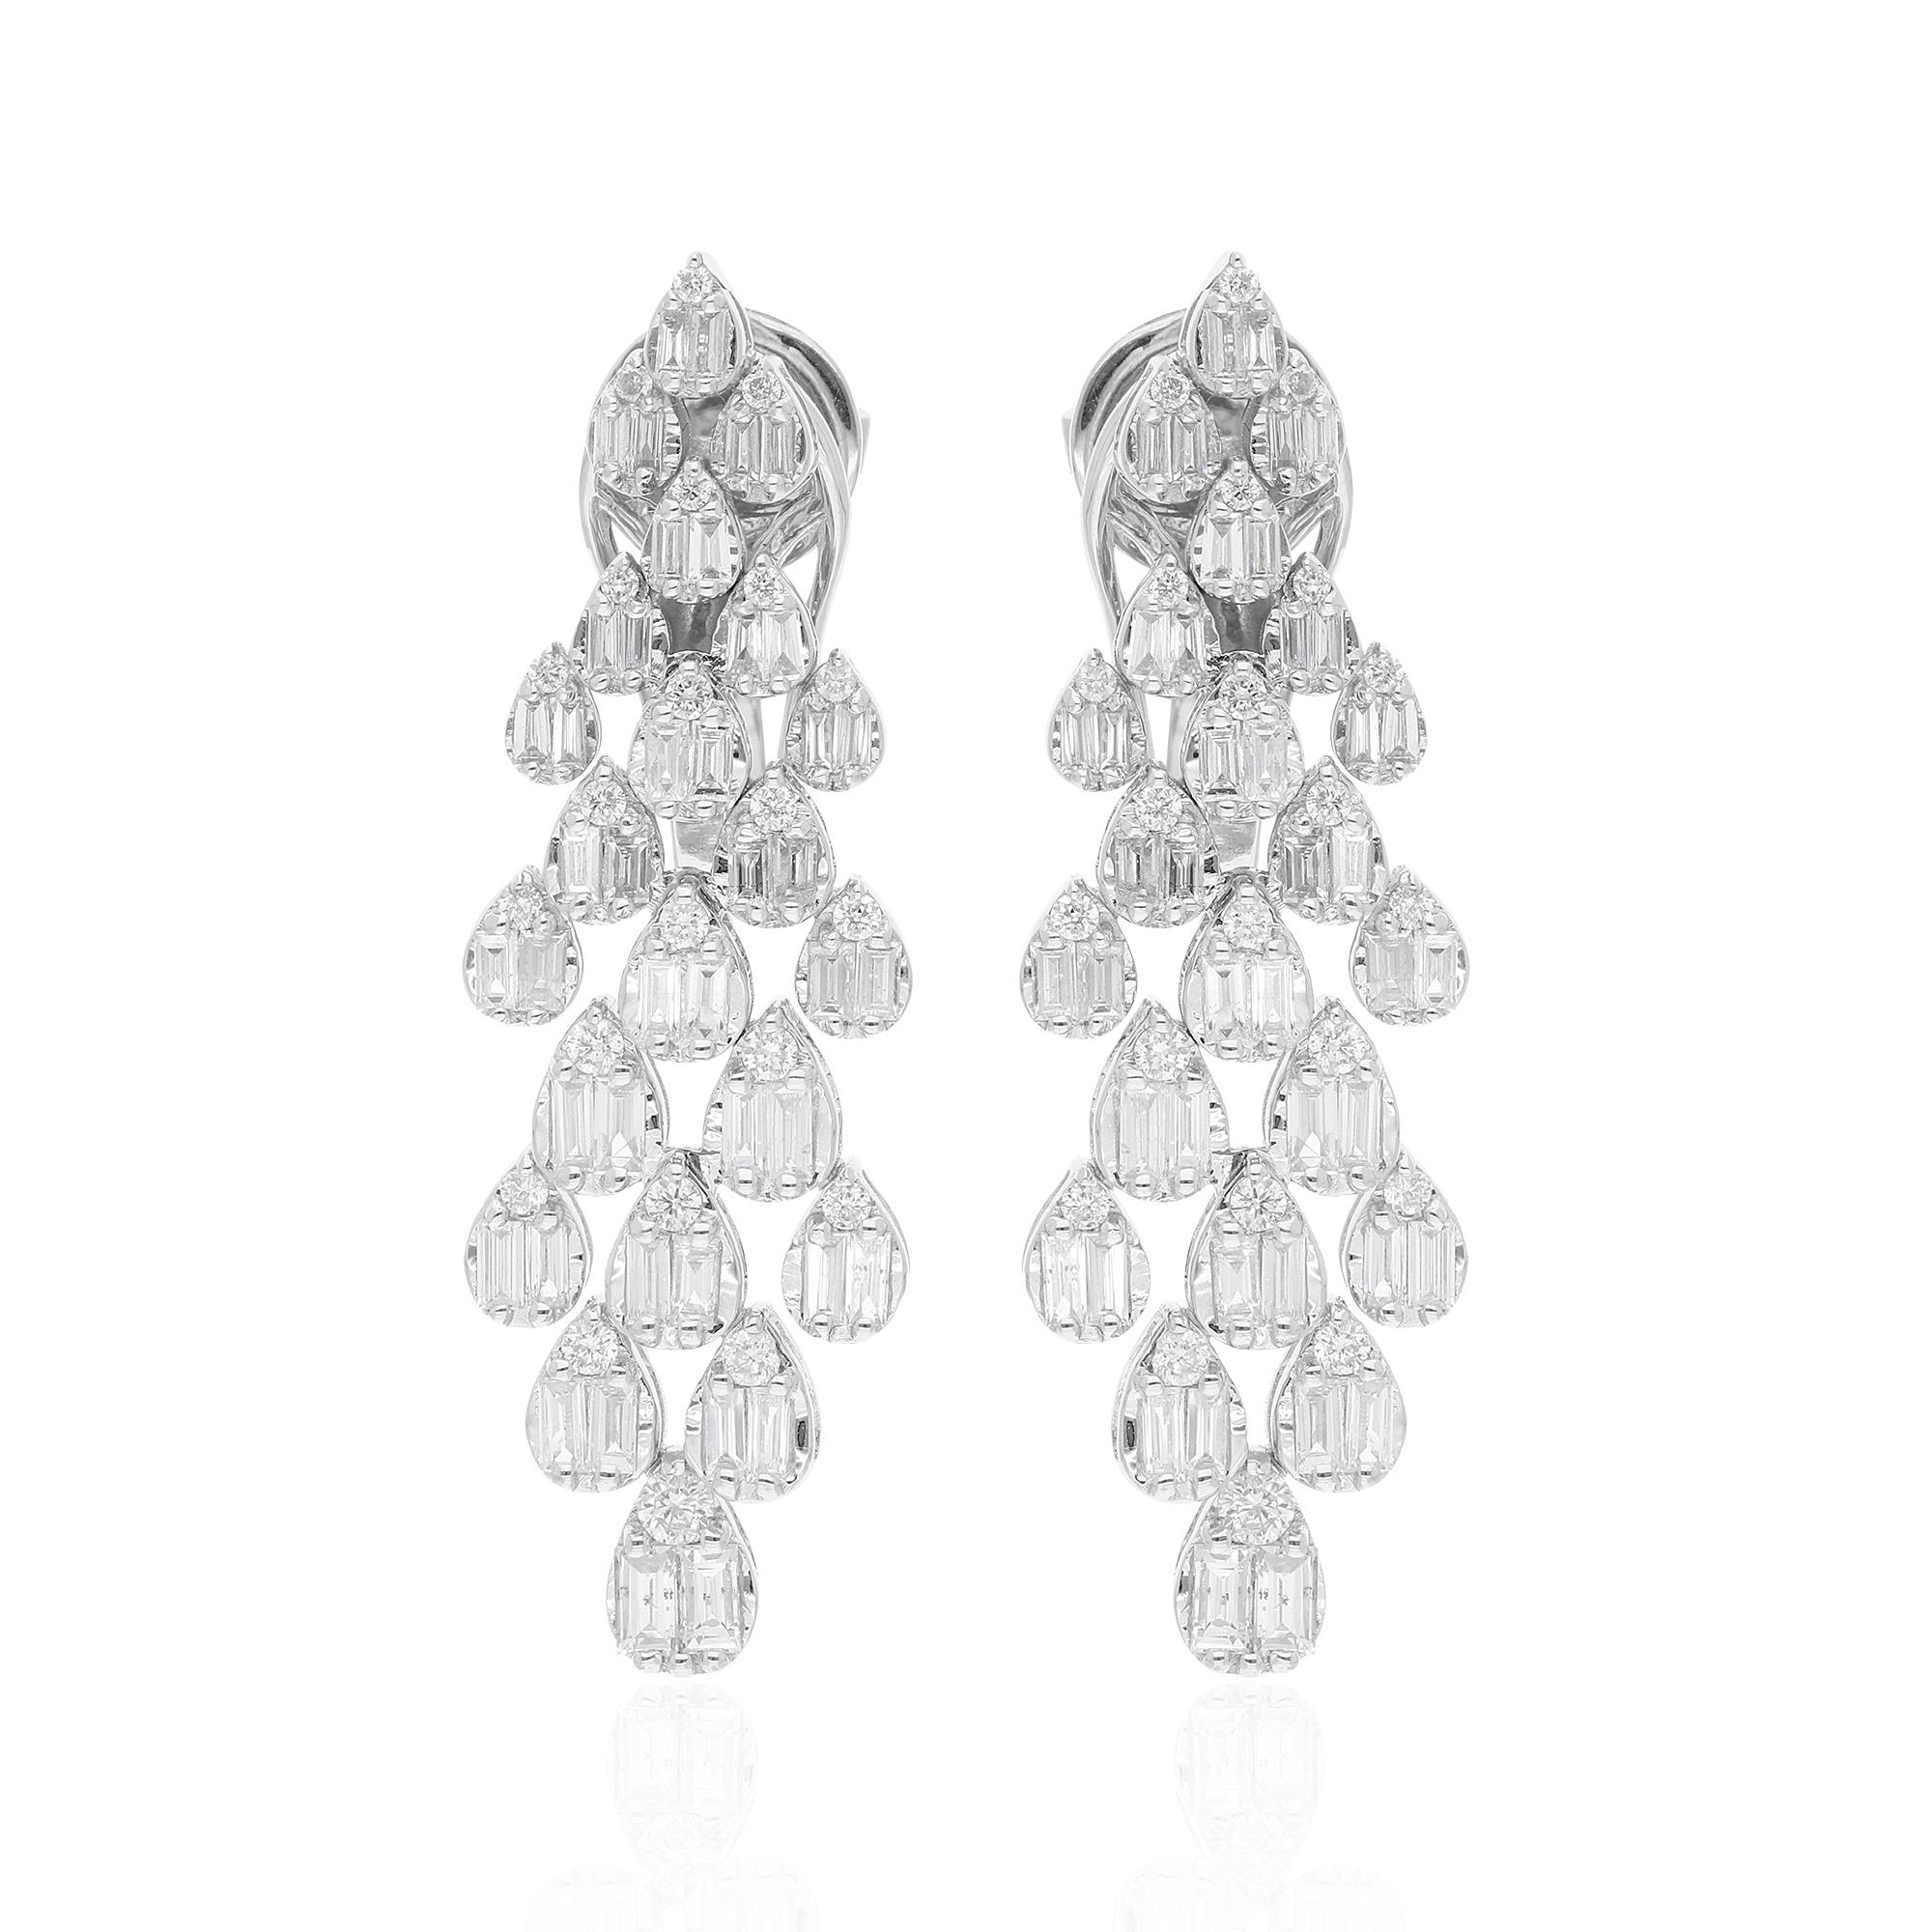 Item Code :- SEE-14588
Gross Wt. :- 10.17 gm
18k Solid White Gold Wt. :- 9.84 gm
Natural Diamond Wt. :- 1.65 Ct. ( AVERAGE DIAMOND CLARITY SI1-SI2 & COLOR H-I )
Earrings Size :- 35 mm approx.

✦ Sizing
.....................
We can adjust most items